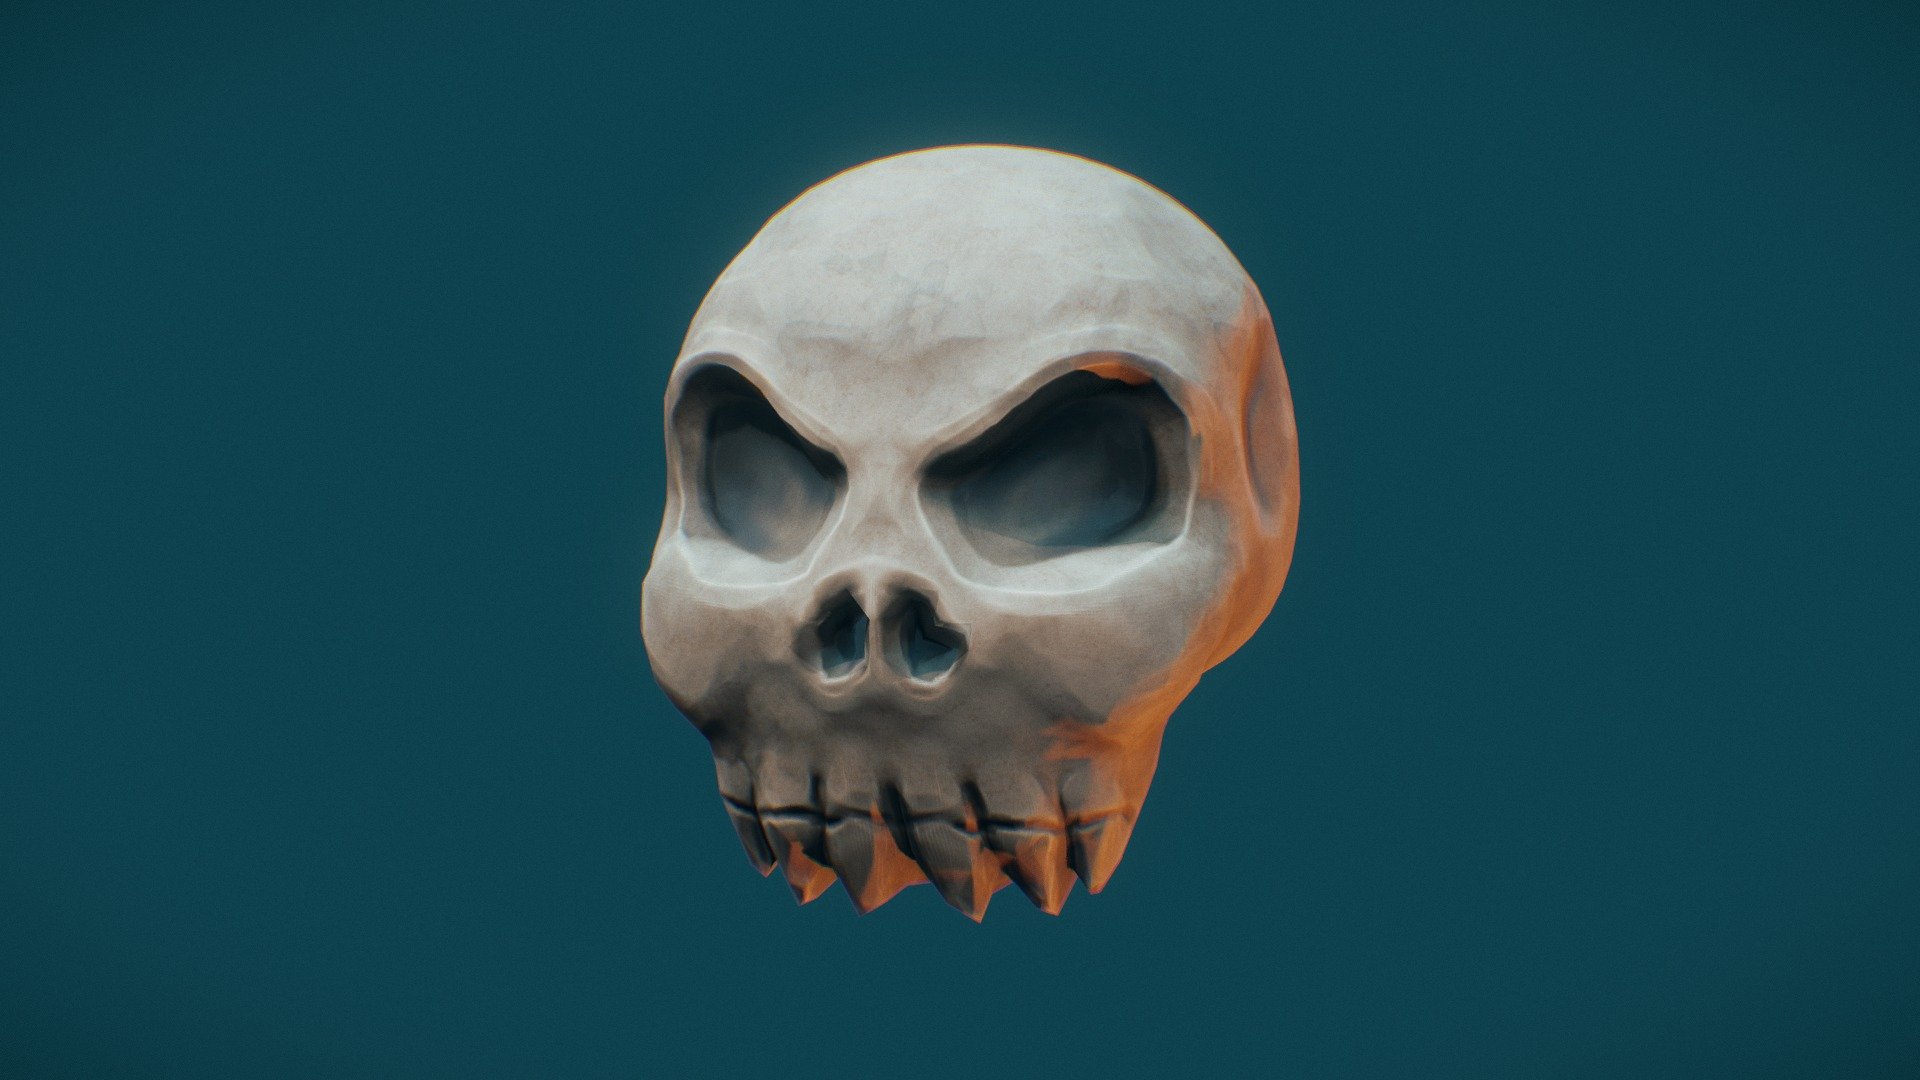 Low Poly Skull for your renders and games

Textures:

Diffuse color, Roughness, Normal

All textures are 2K

Files Formats:

Blend

Fbx

Obj - Stylized Skull - Buy Royalty Free 3D model by Vanessa Araújo (@vanessa3d) 3d model